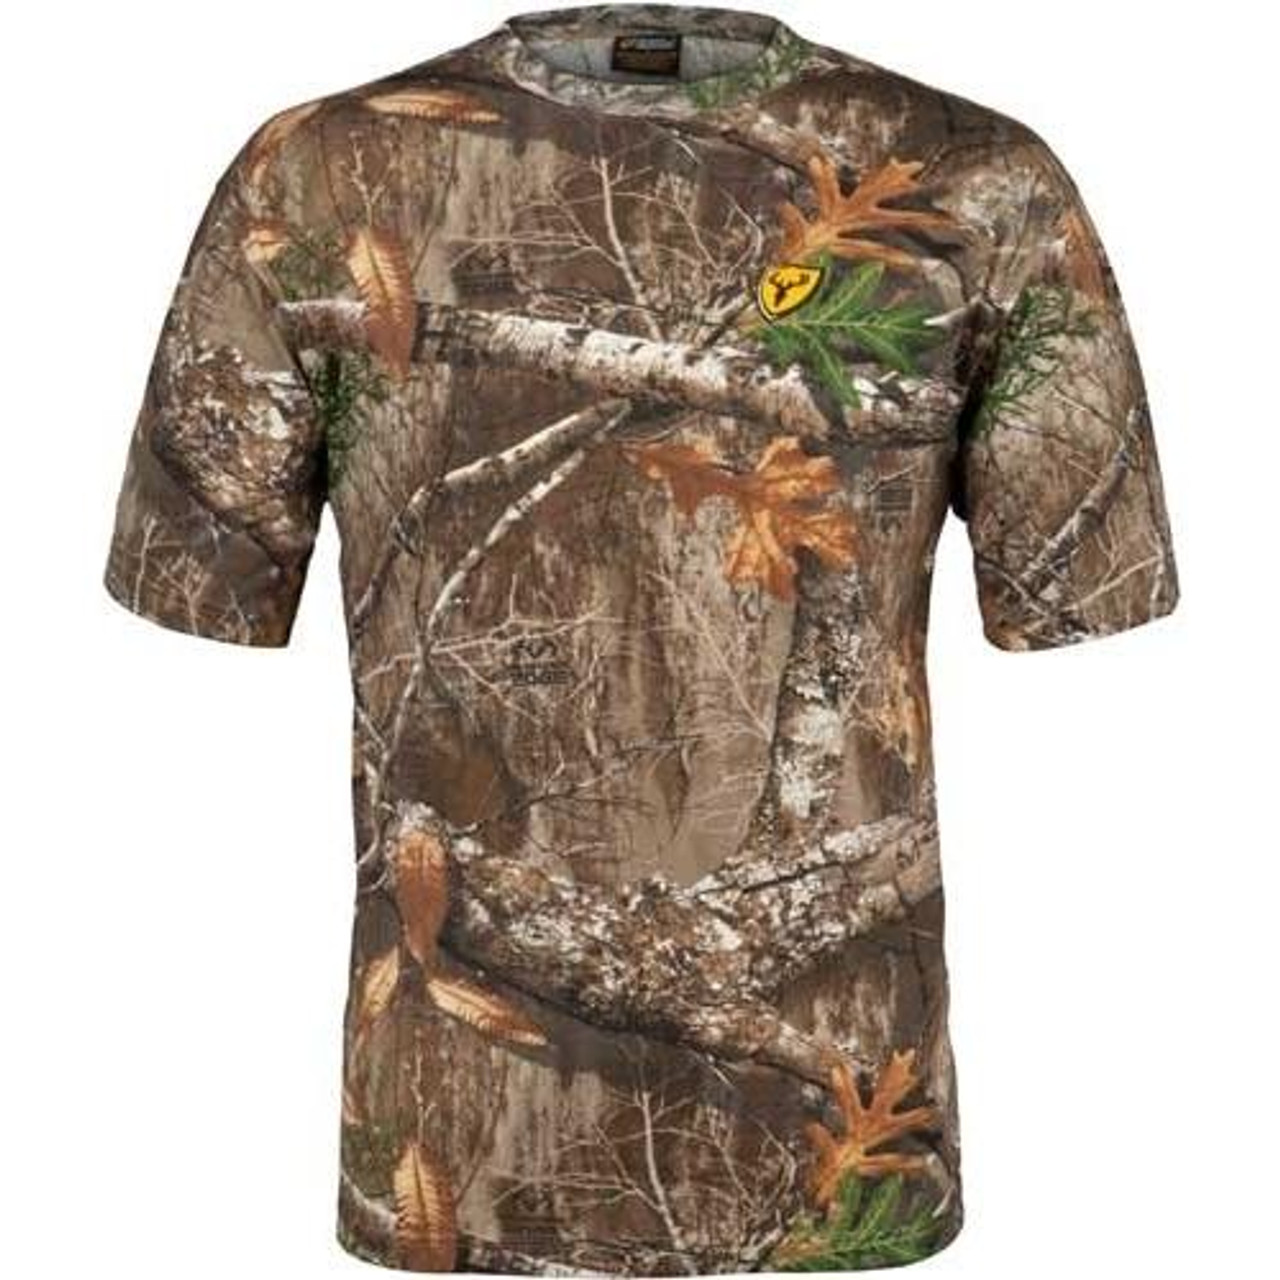 https://cdn11.bigcommerce.com/s-70mih4s/images/stencil/1280x1280/products/7459/42712/Scent-Blocker-Youth-Cotton-Tee-Realtree-Edge-08422930686_image1__14641.1564883710.jpg?c=2